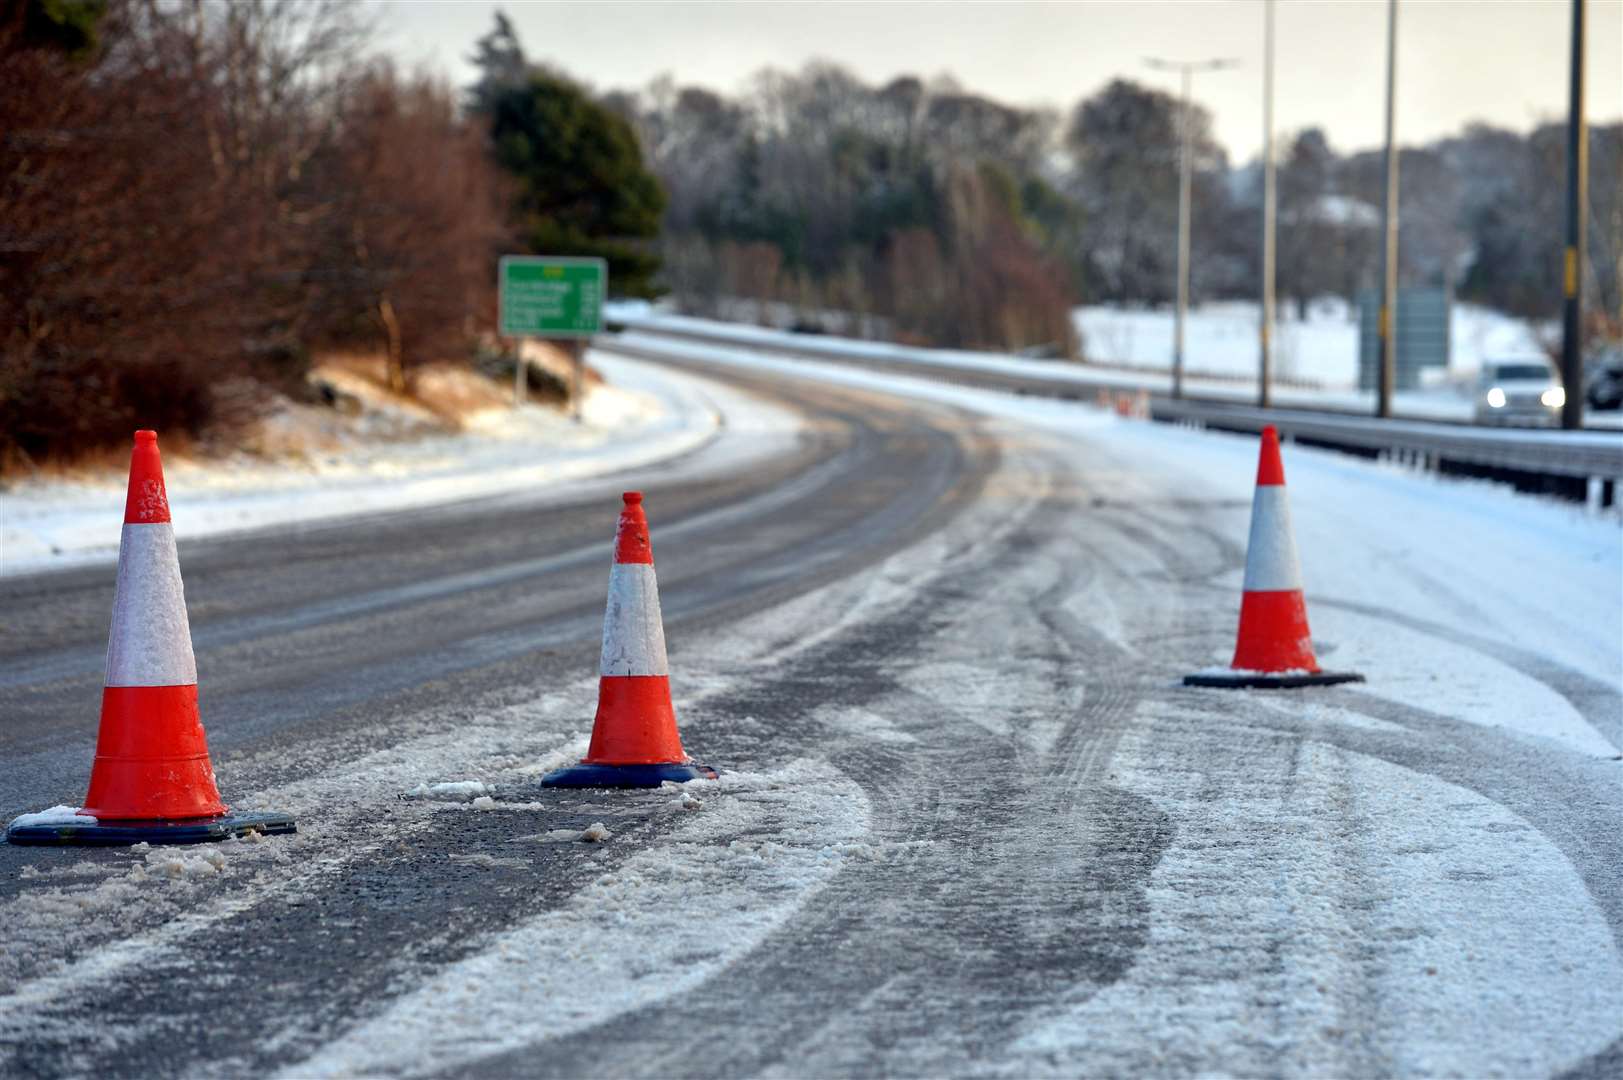 The A9 has been closed in both directions but has since reopened.